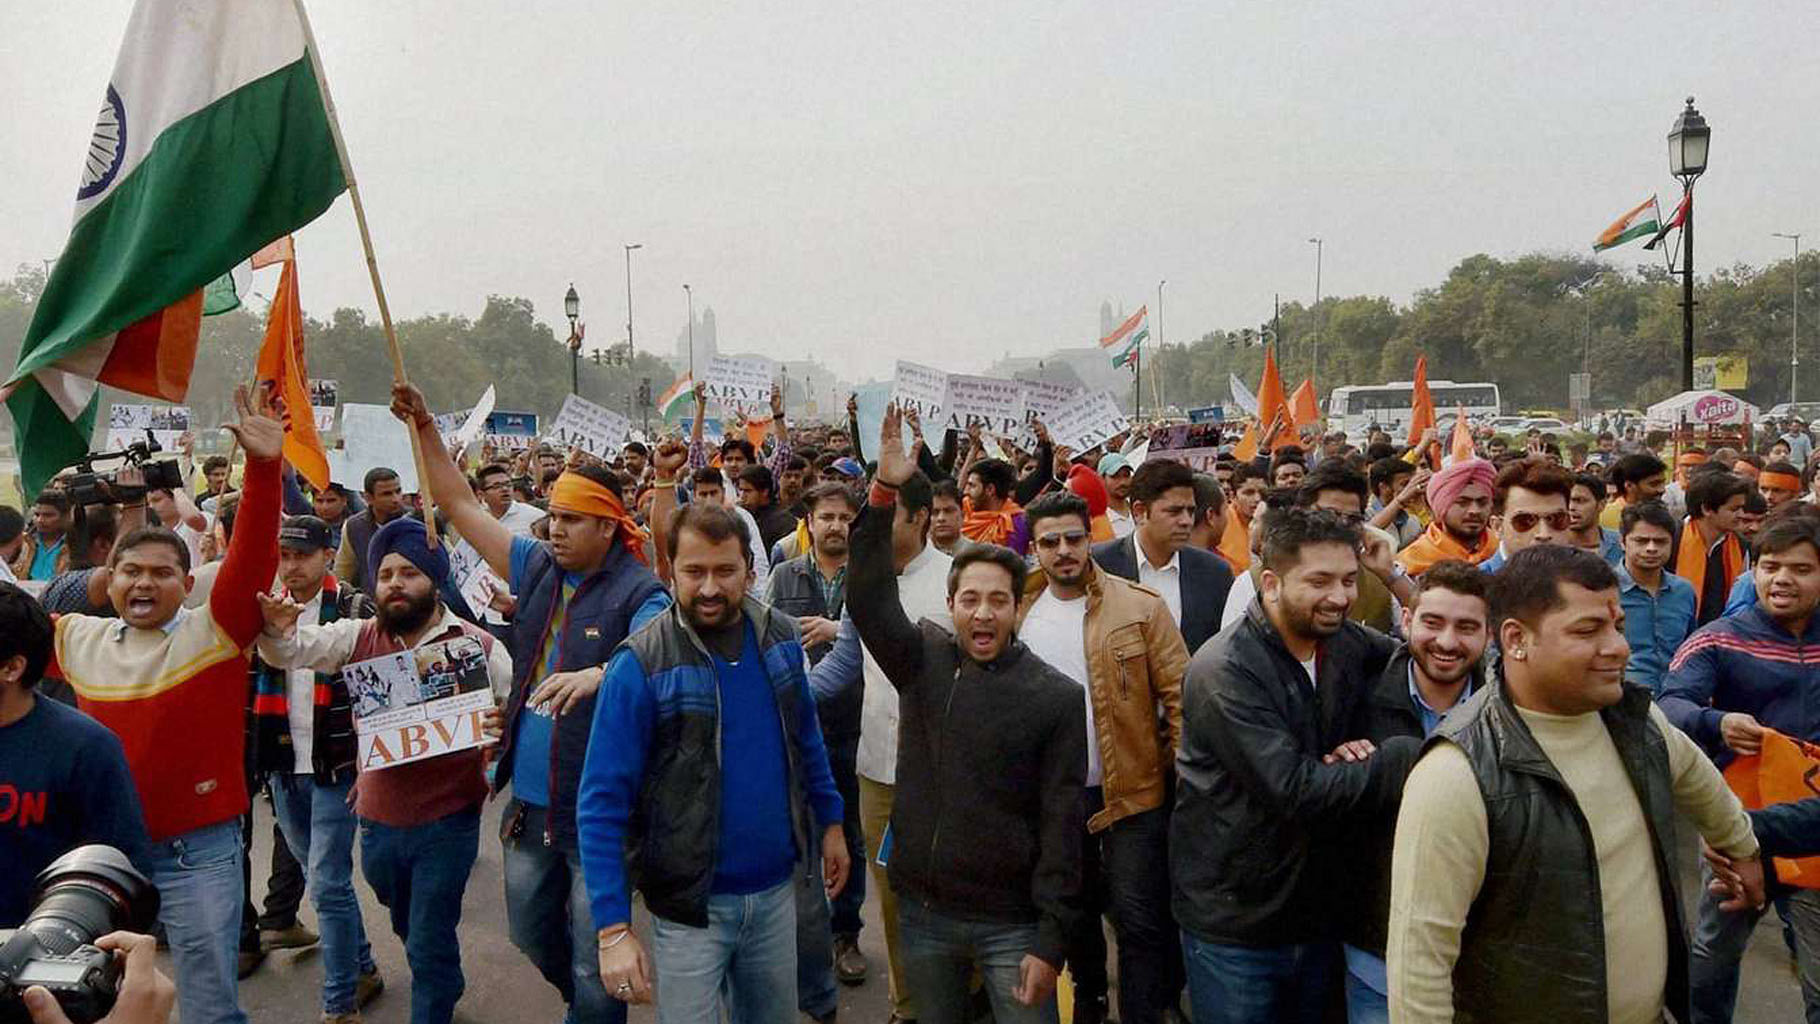 File photo: ABVP activists at a protest. (Photo: PTI)